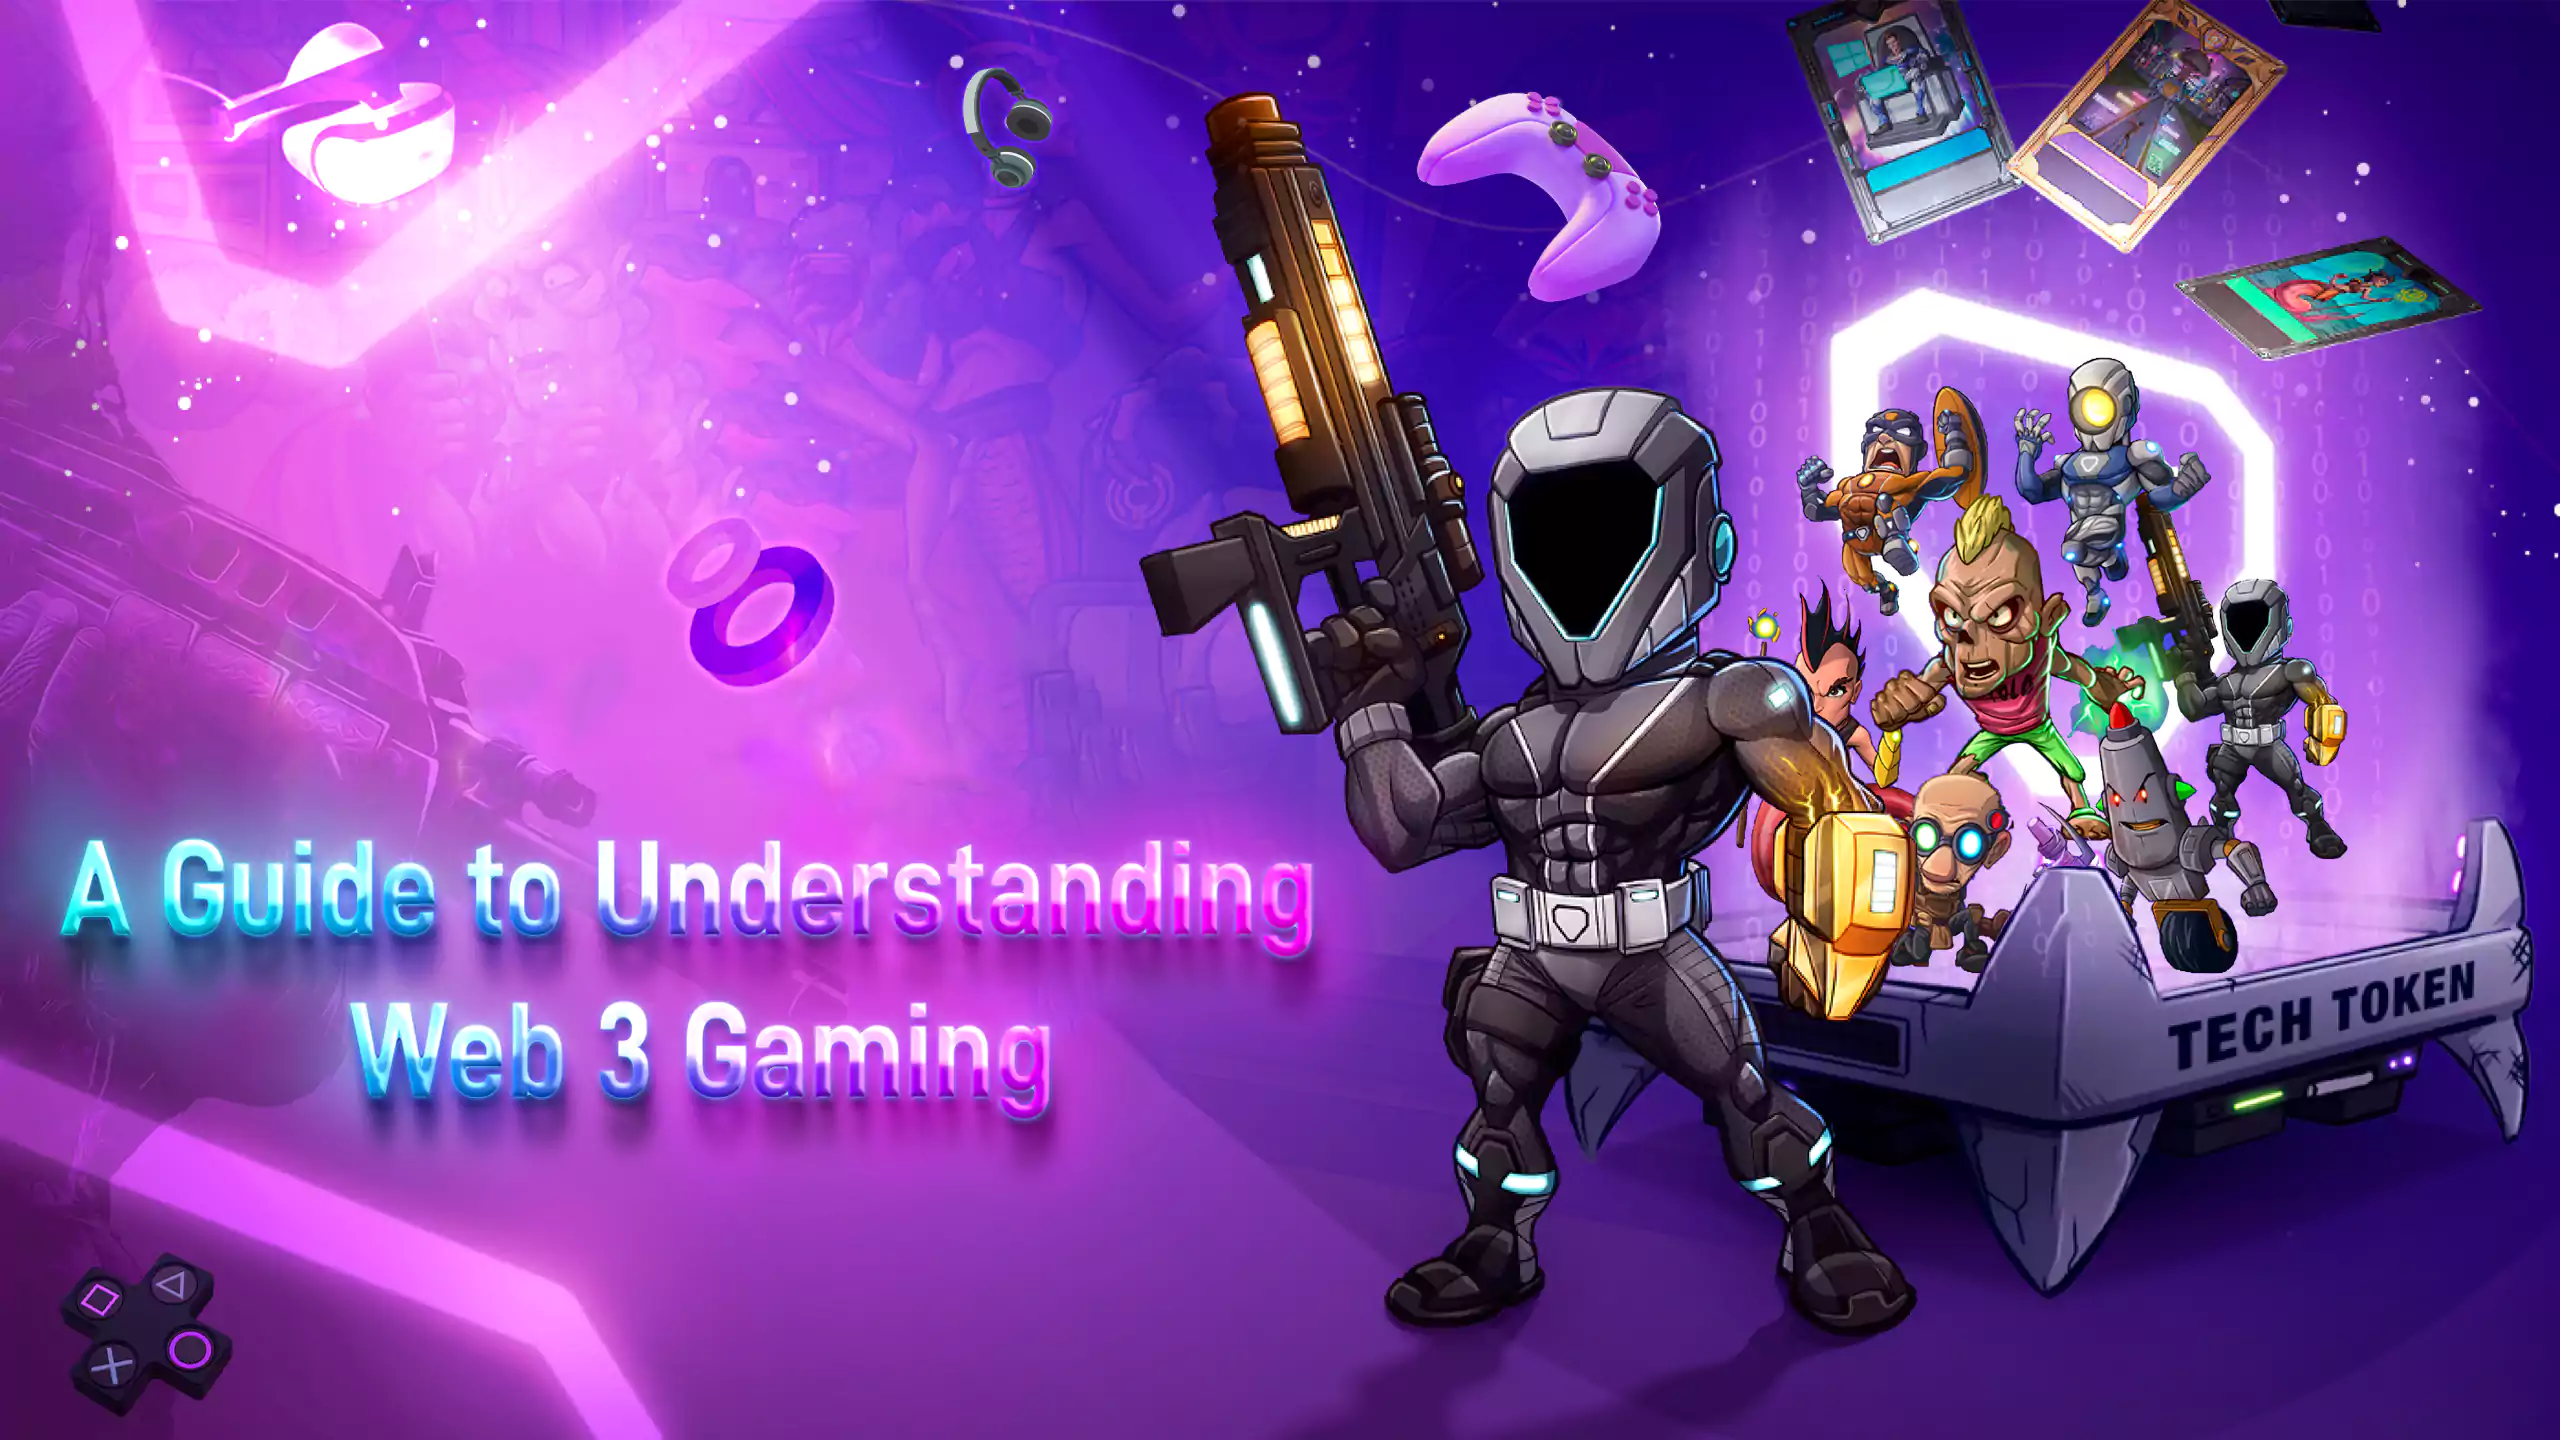 A Guide to Understanding Web 3 Gaming